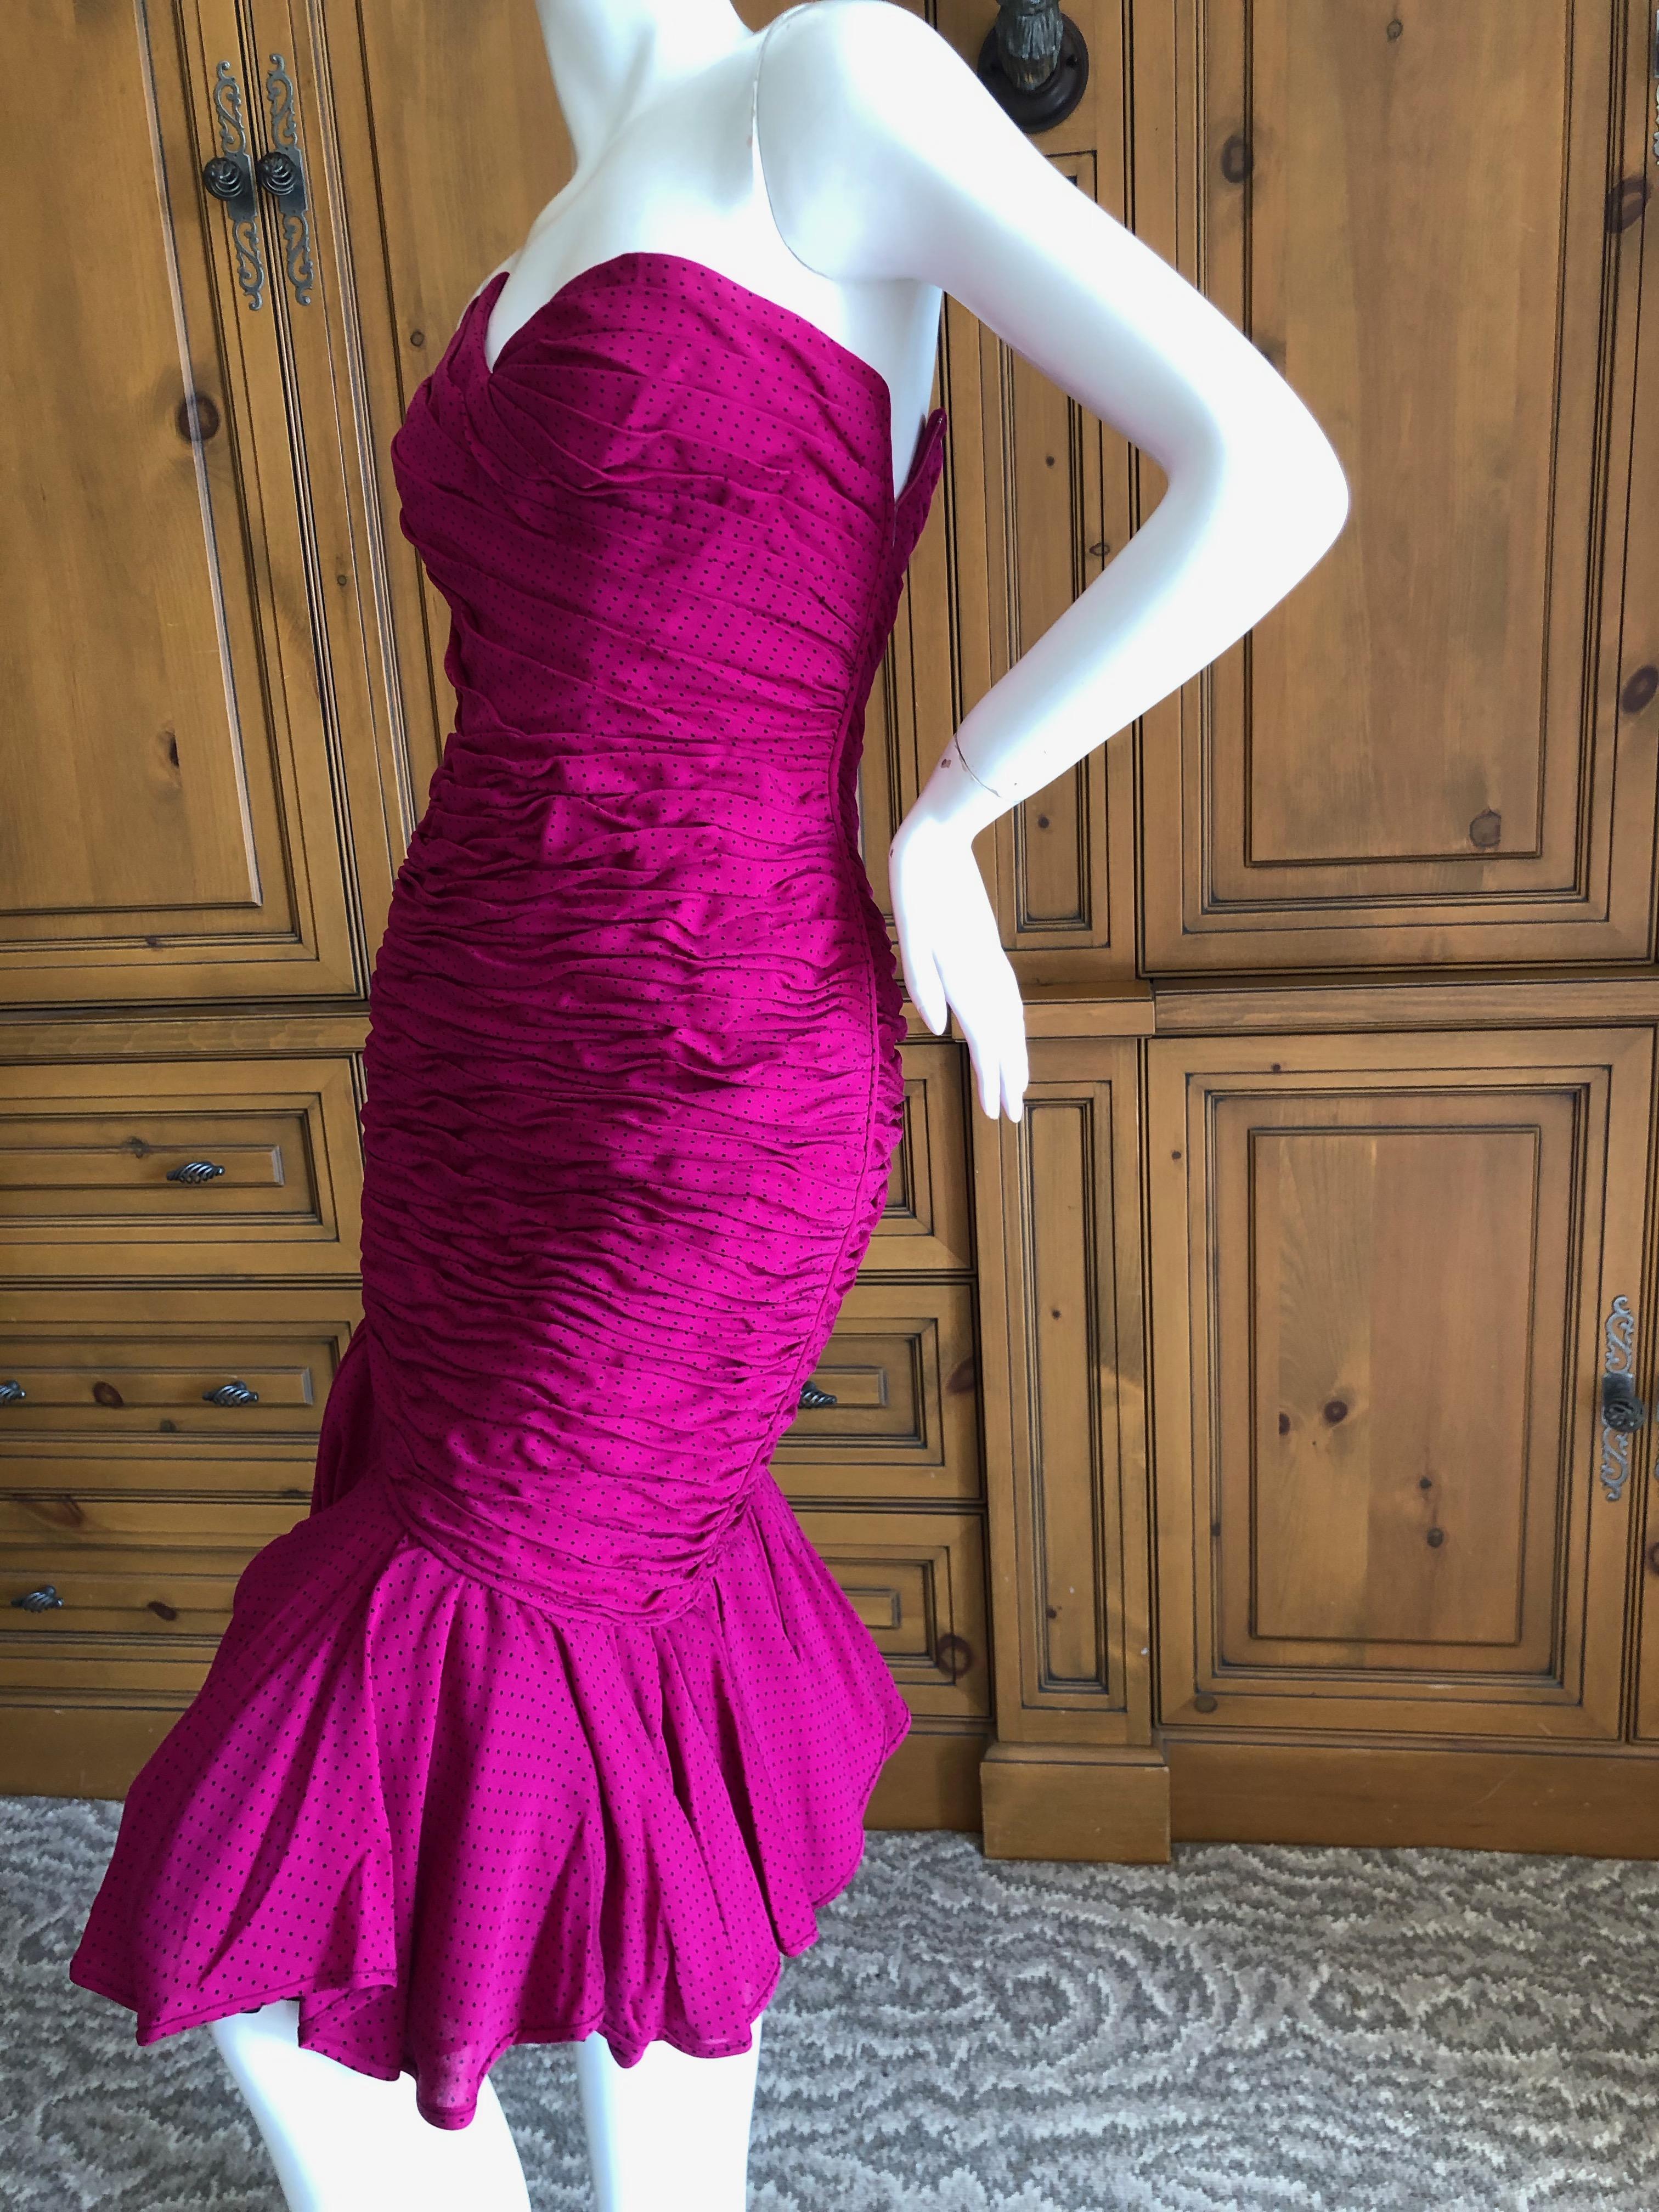 Women's Emanuel Ungaro Parallel Fall 1984 Shirred Strapless Evening Dress w Lace Hem For Sale